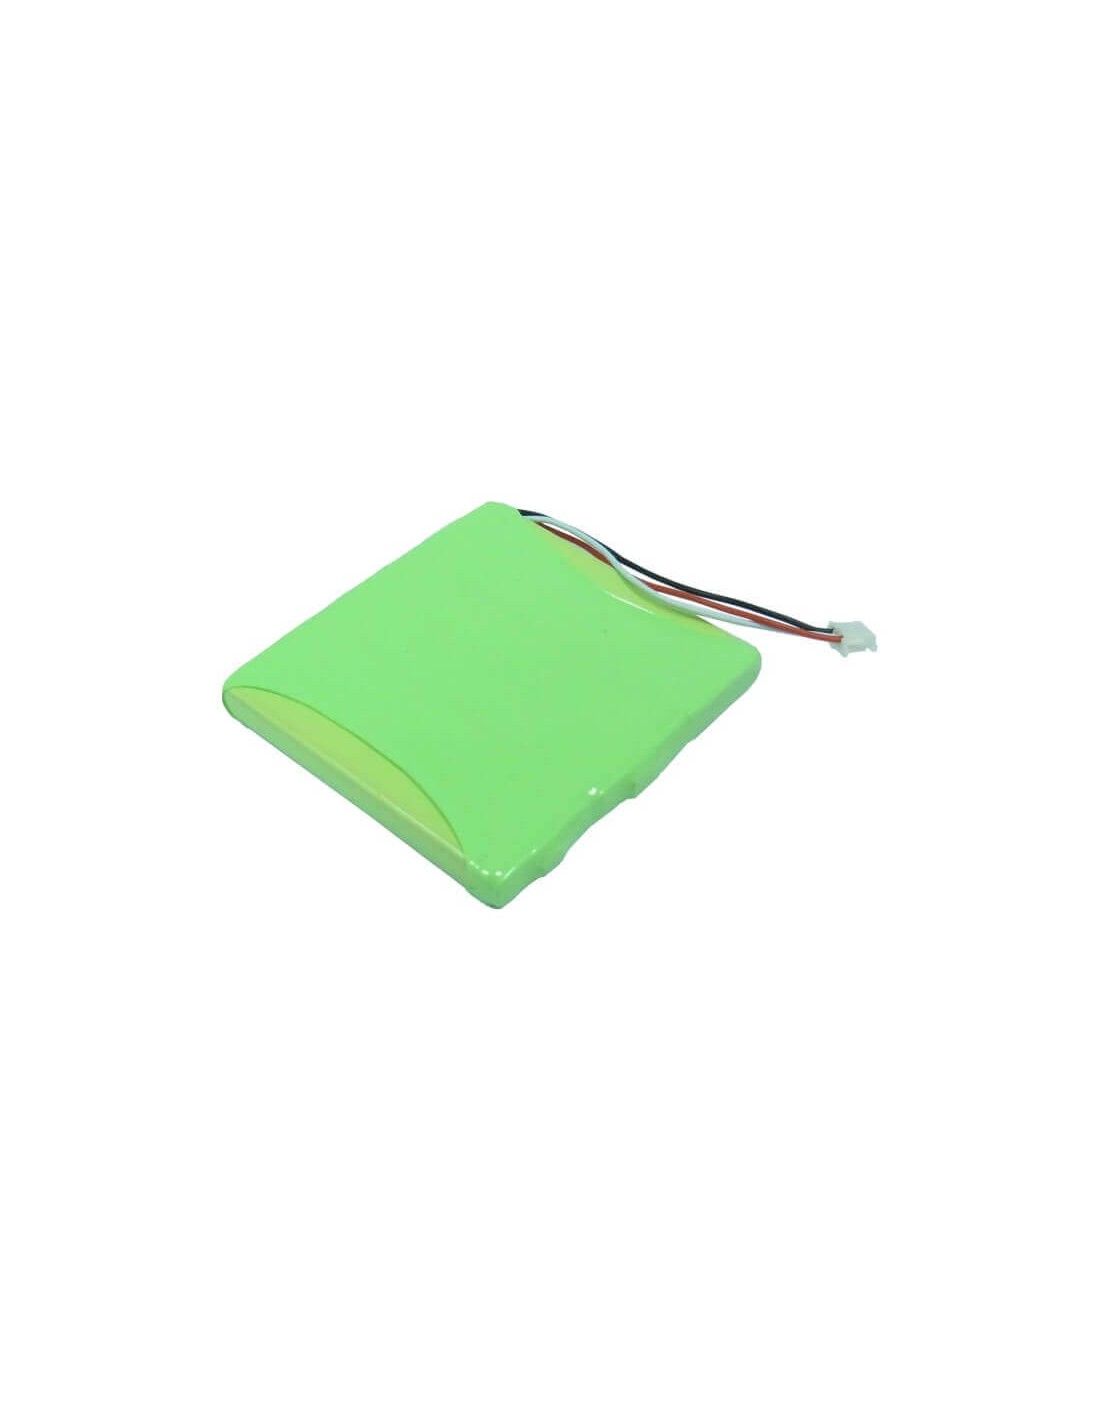 Battery for Schneider, Chs900, Cp900, Cp900am 3.6V, 750mAh - 2.70Wh